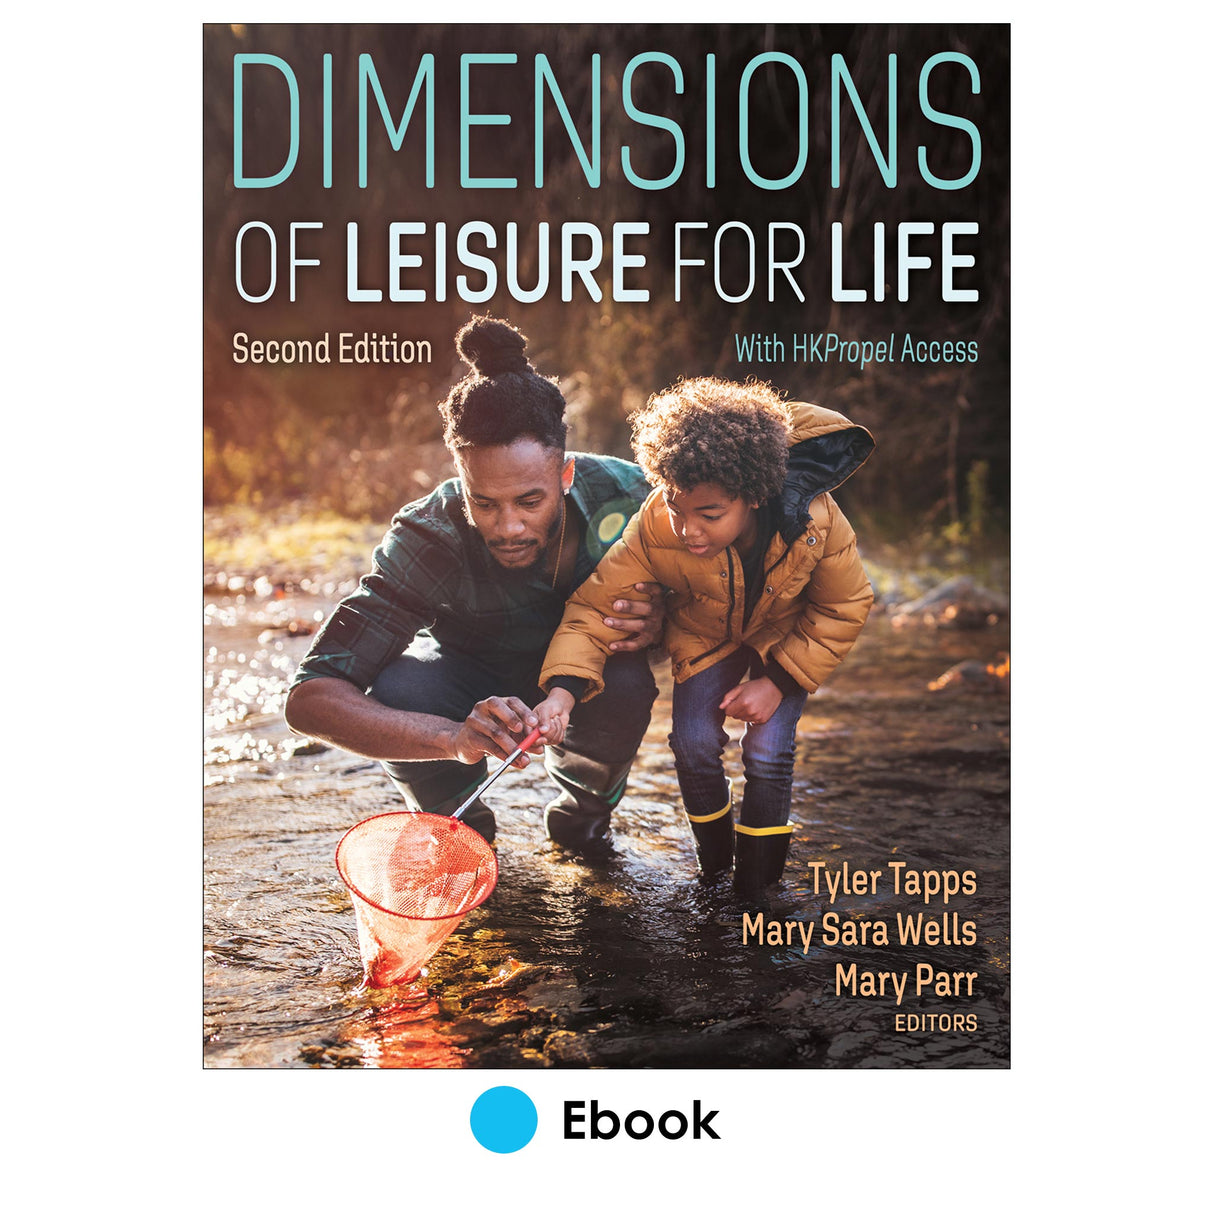 Dimensions of Leisure for Life 2nd Edition Ebook With HKPropel Access